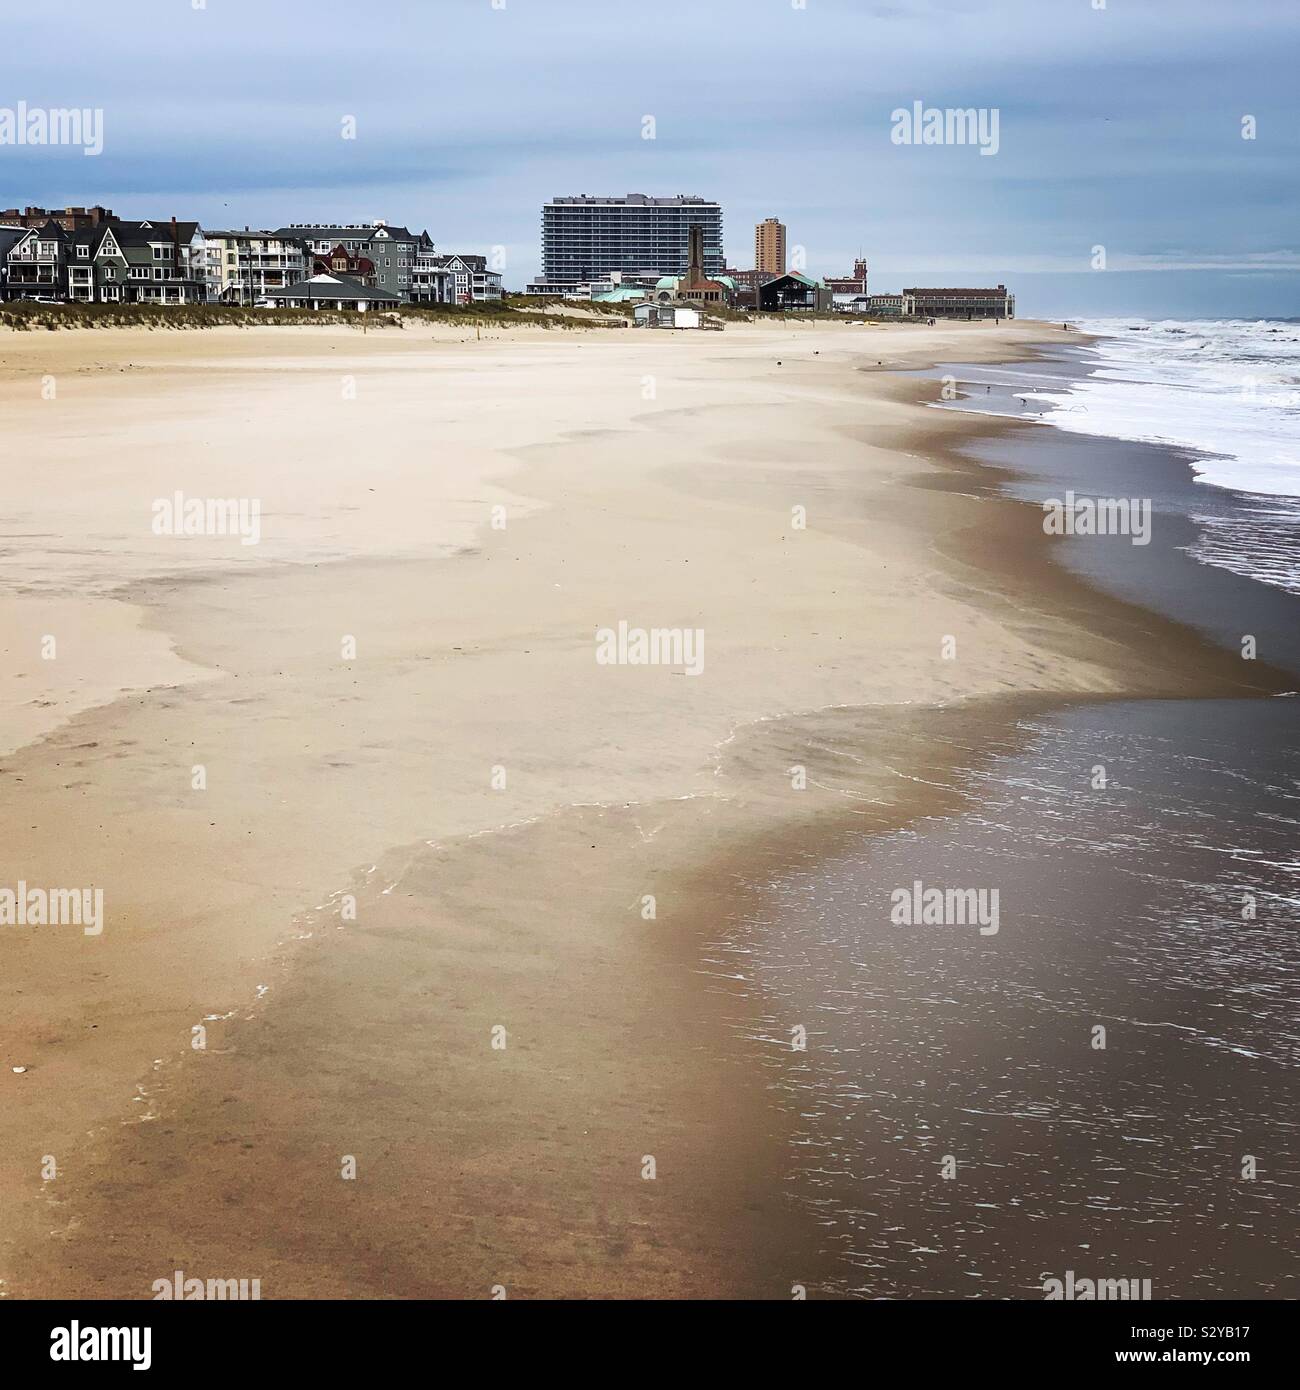 Am Strand im Oktober in Ocean Grove, Neptun Township, Monmouth County, New Jersey, United States Stockfoto